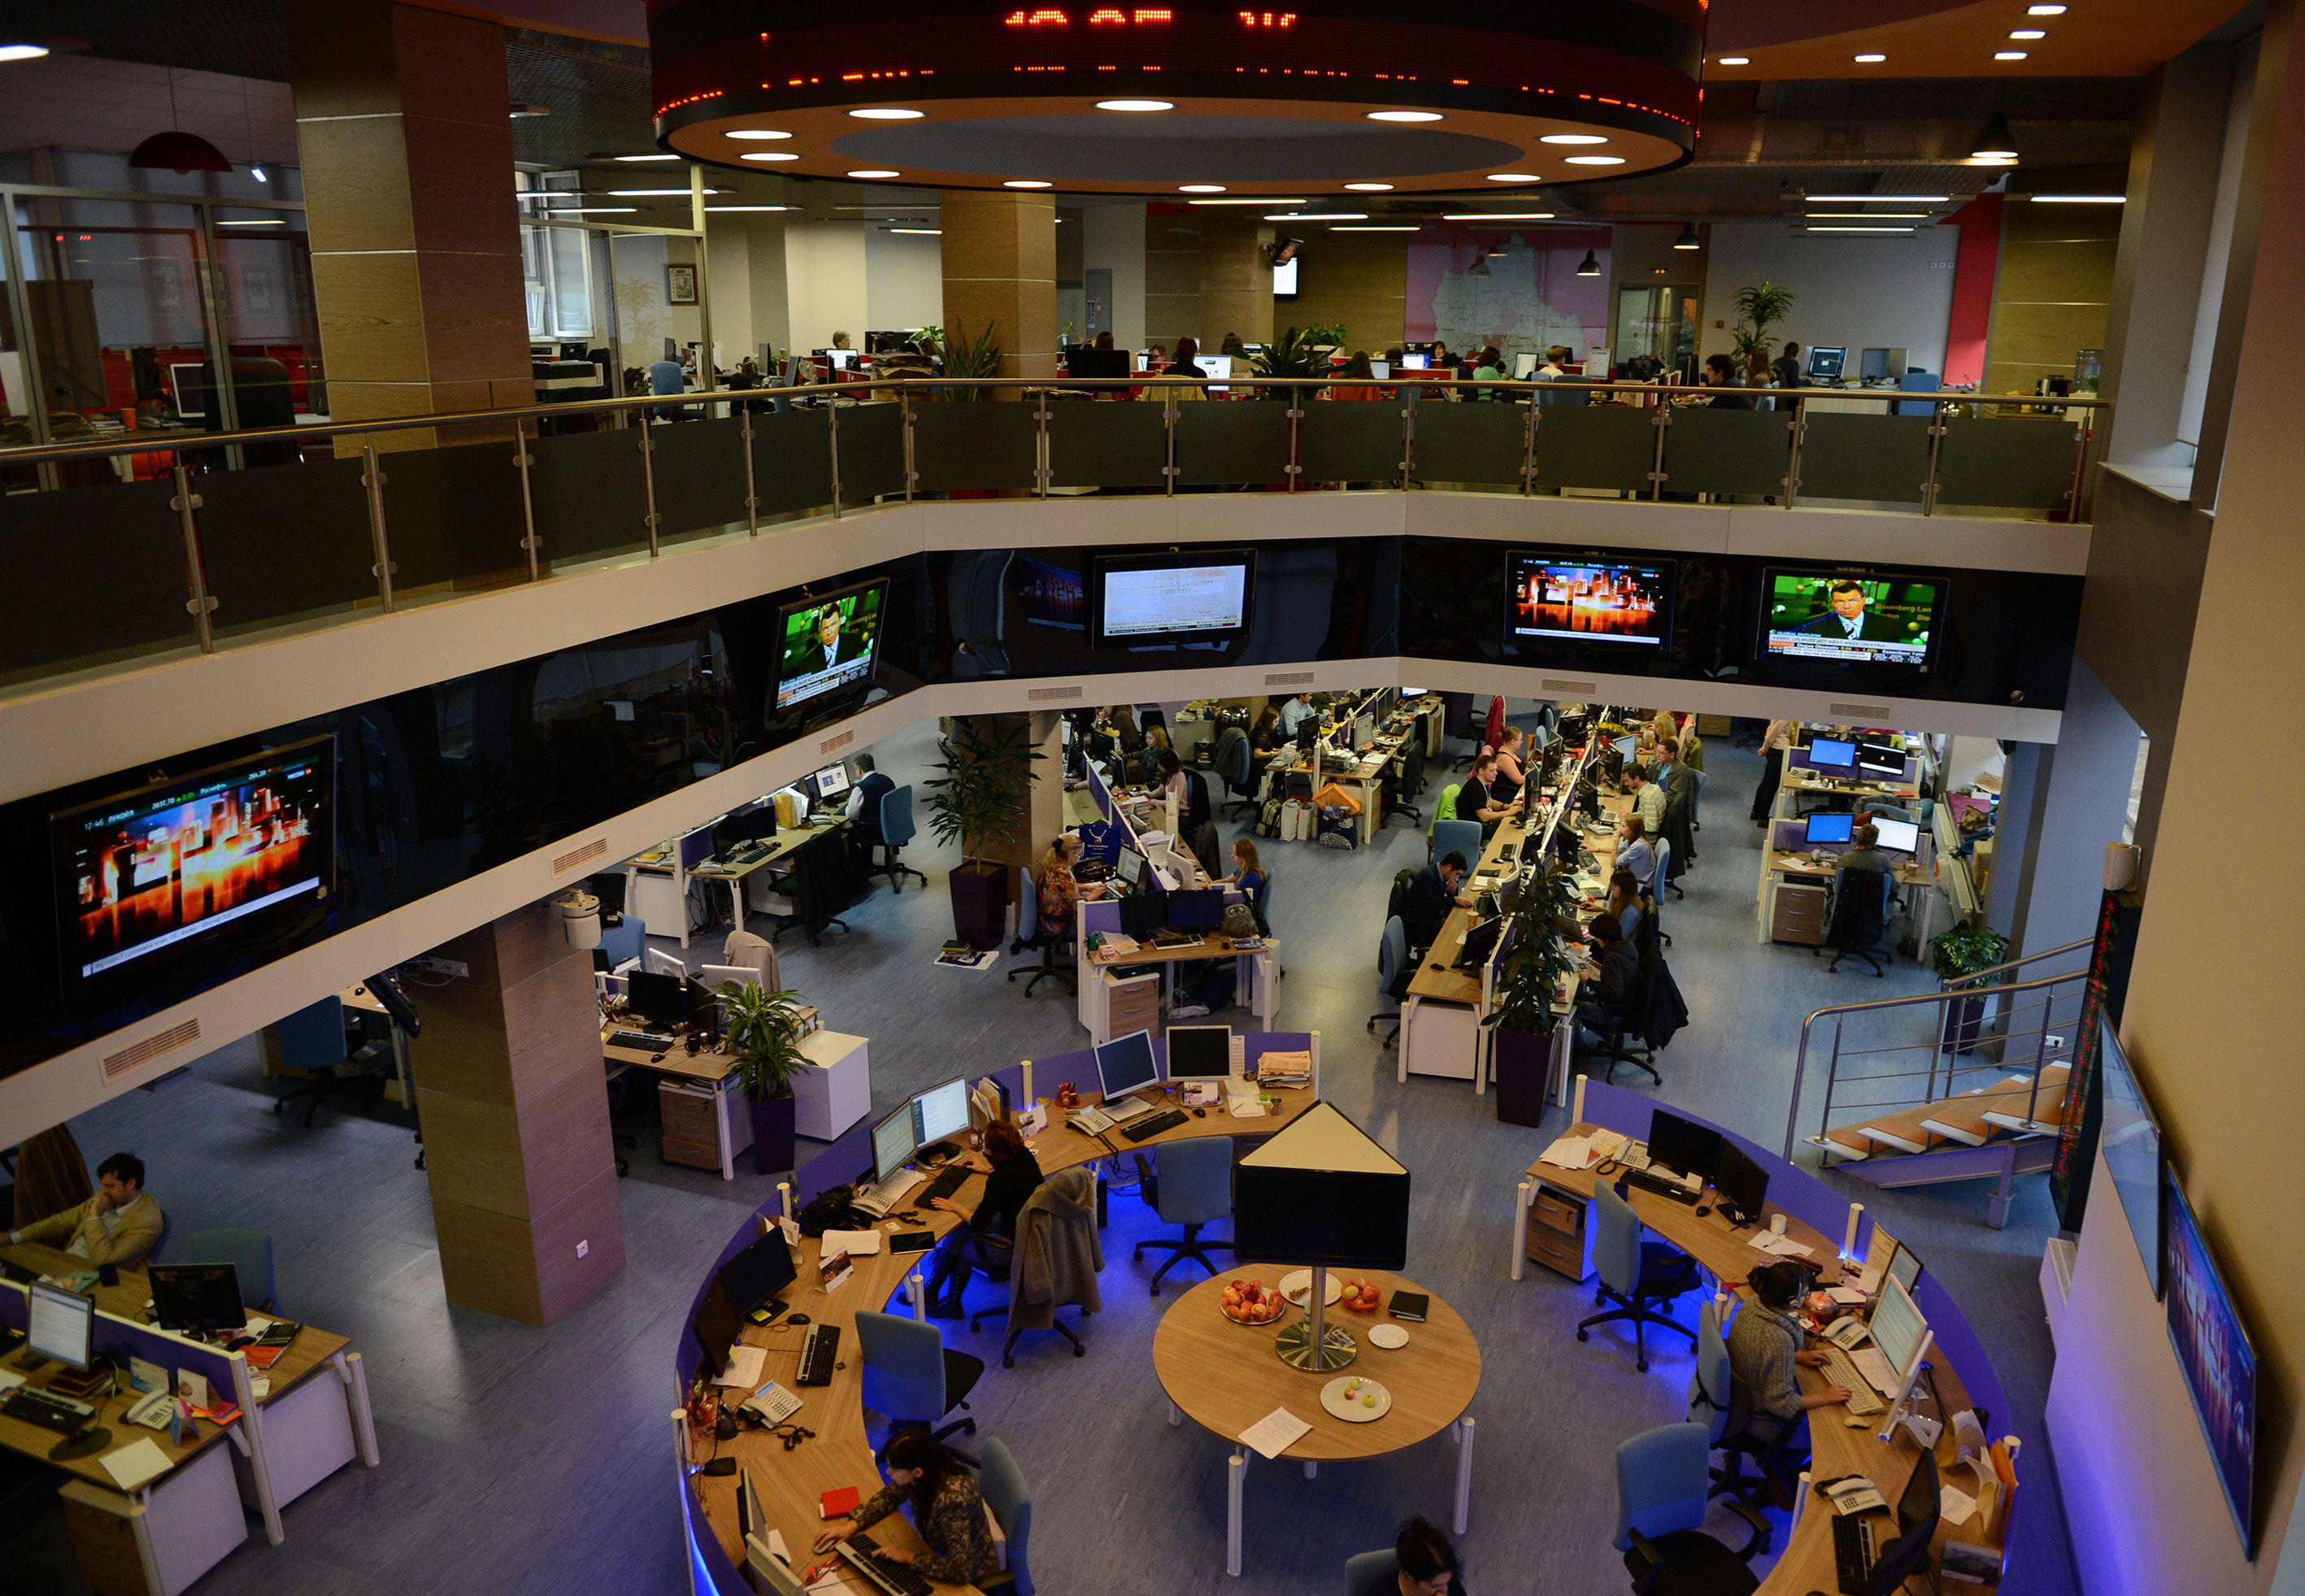 An internal view of the former Russian RIA Novosti news agency headquarters, which is now Rossia Segodnya (Russia Today) global news agency since President Vladimir Putin signed a decree liquidating the former news agency, in the capital Moscow, on Dec, 12, 2013. (Sefa Karacan—Anadolu Agency/Getty Images)